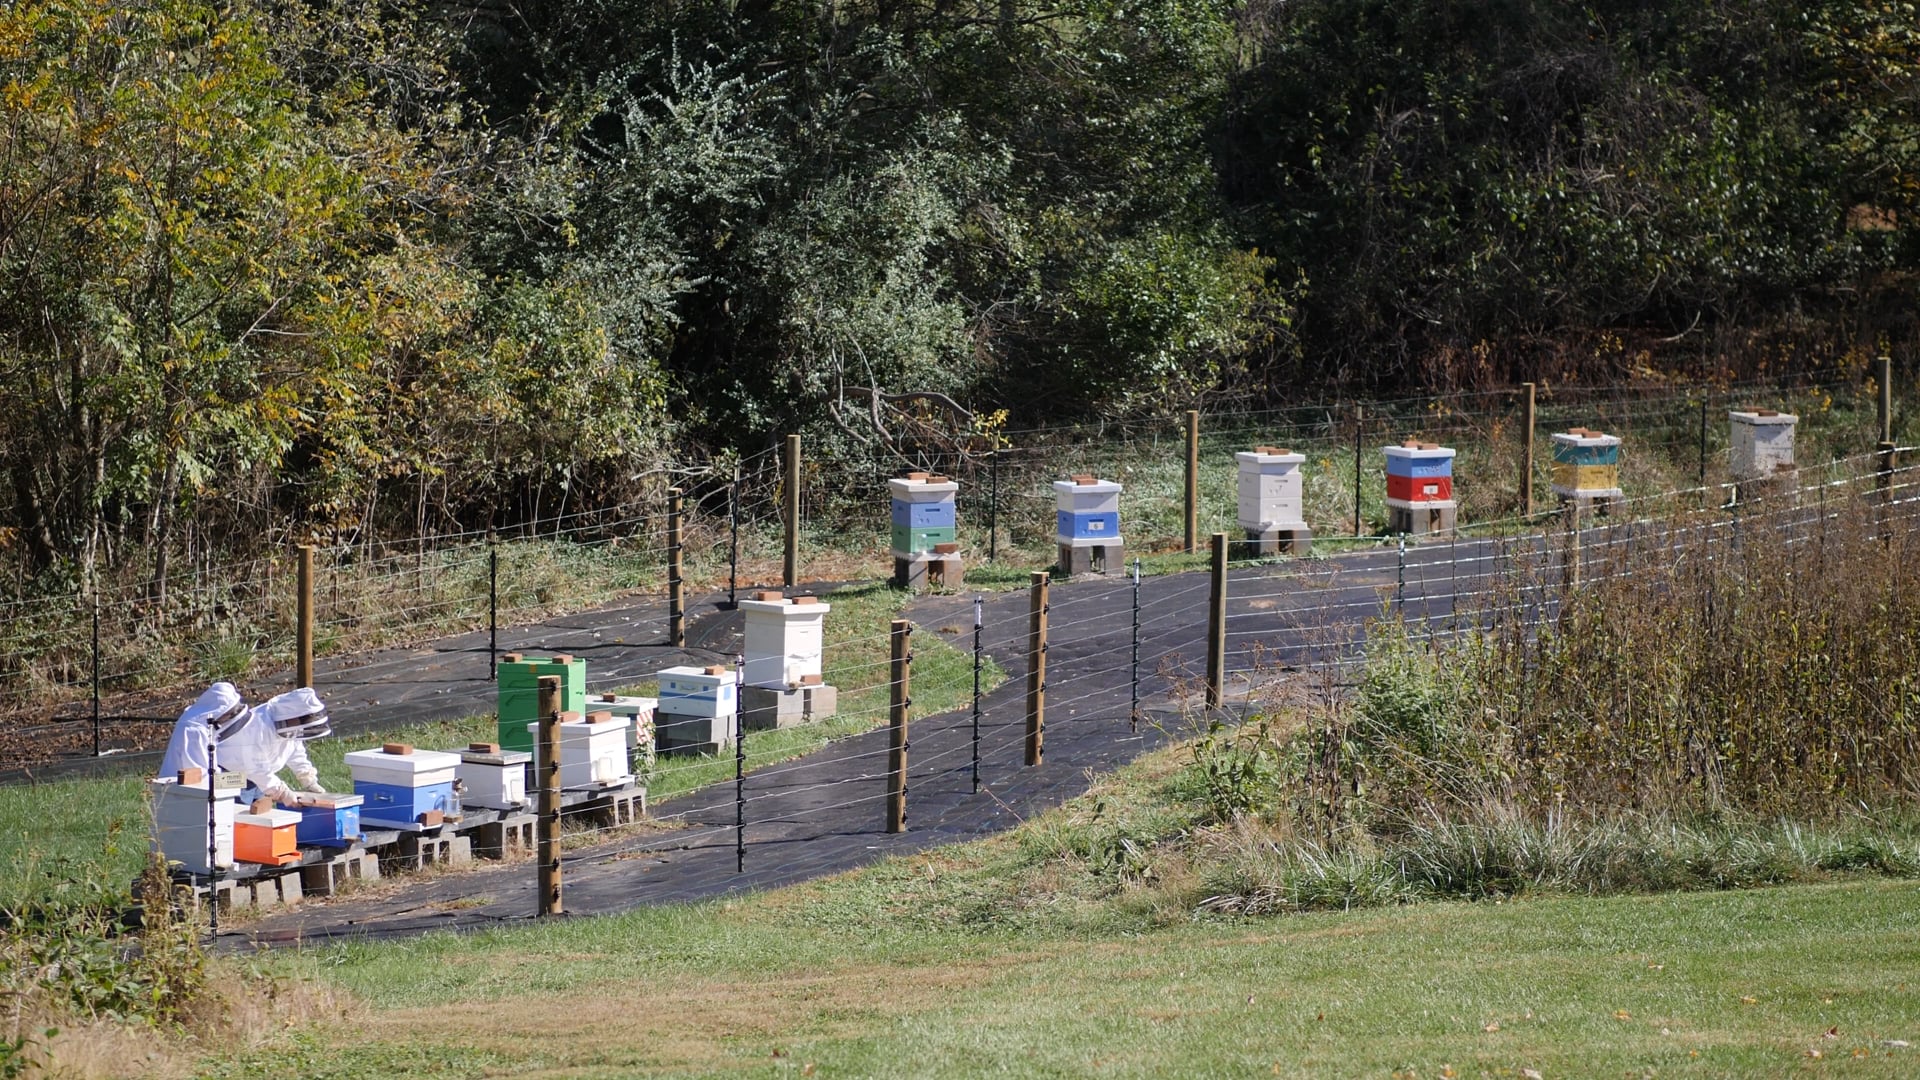 Beekeeping at Monticello